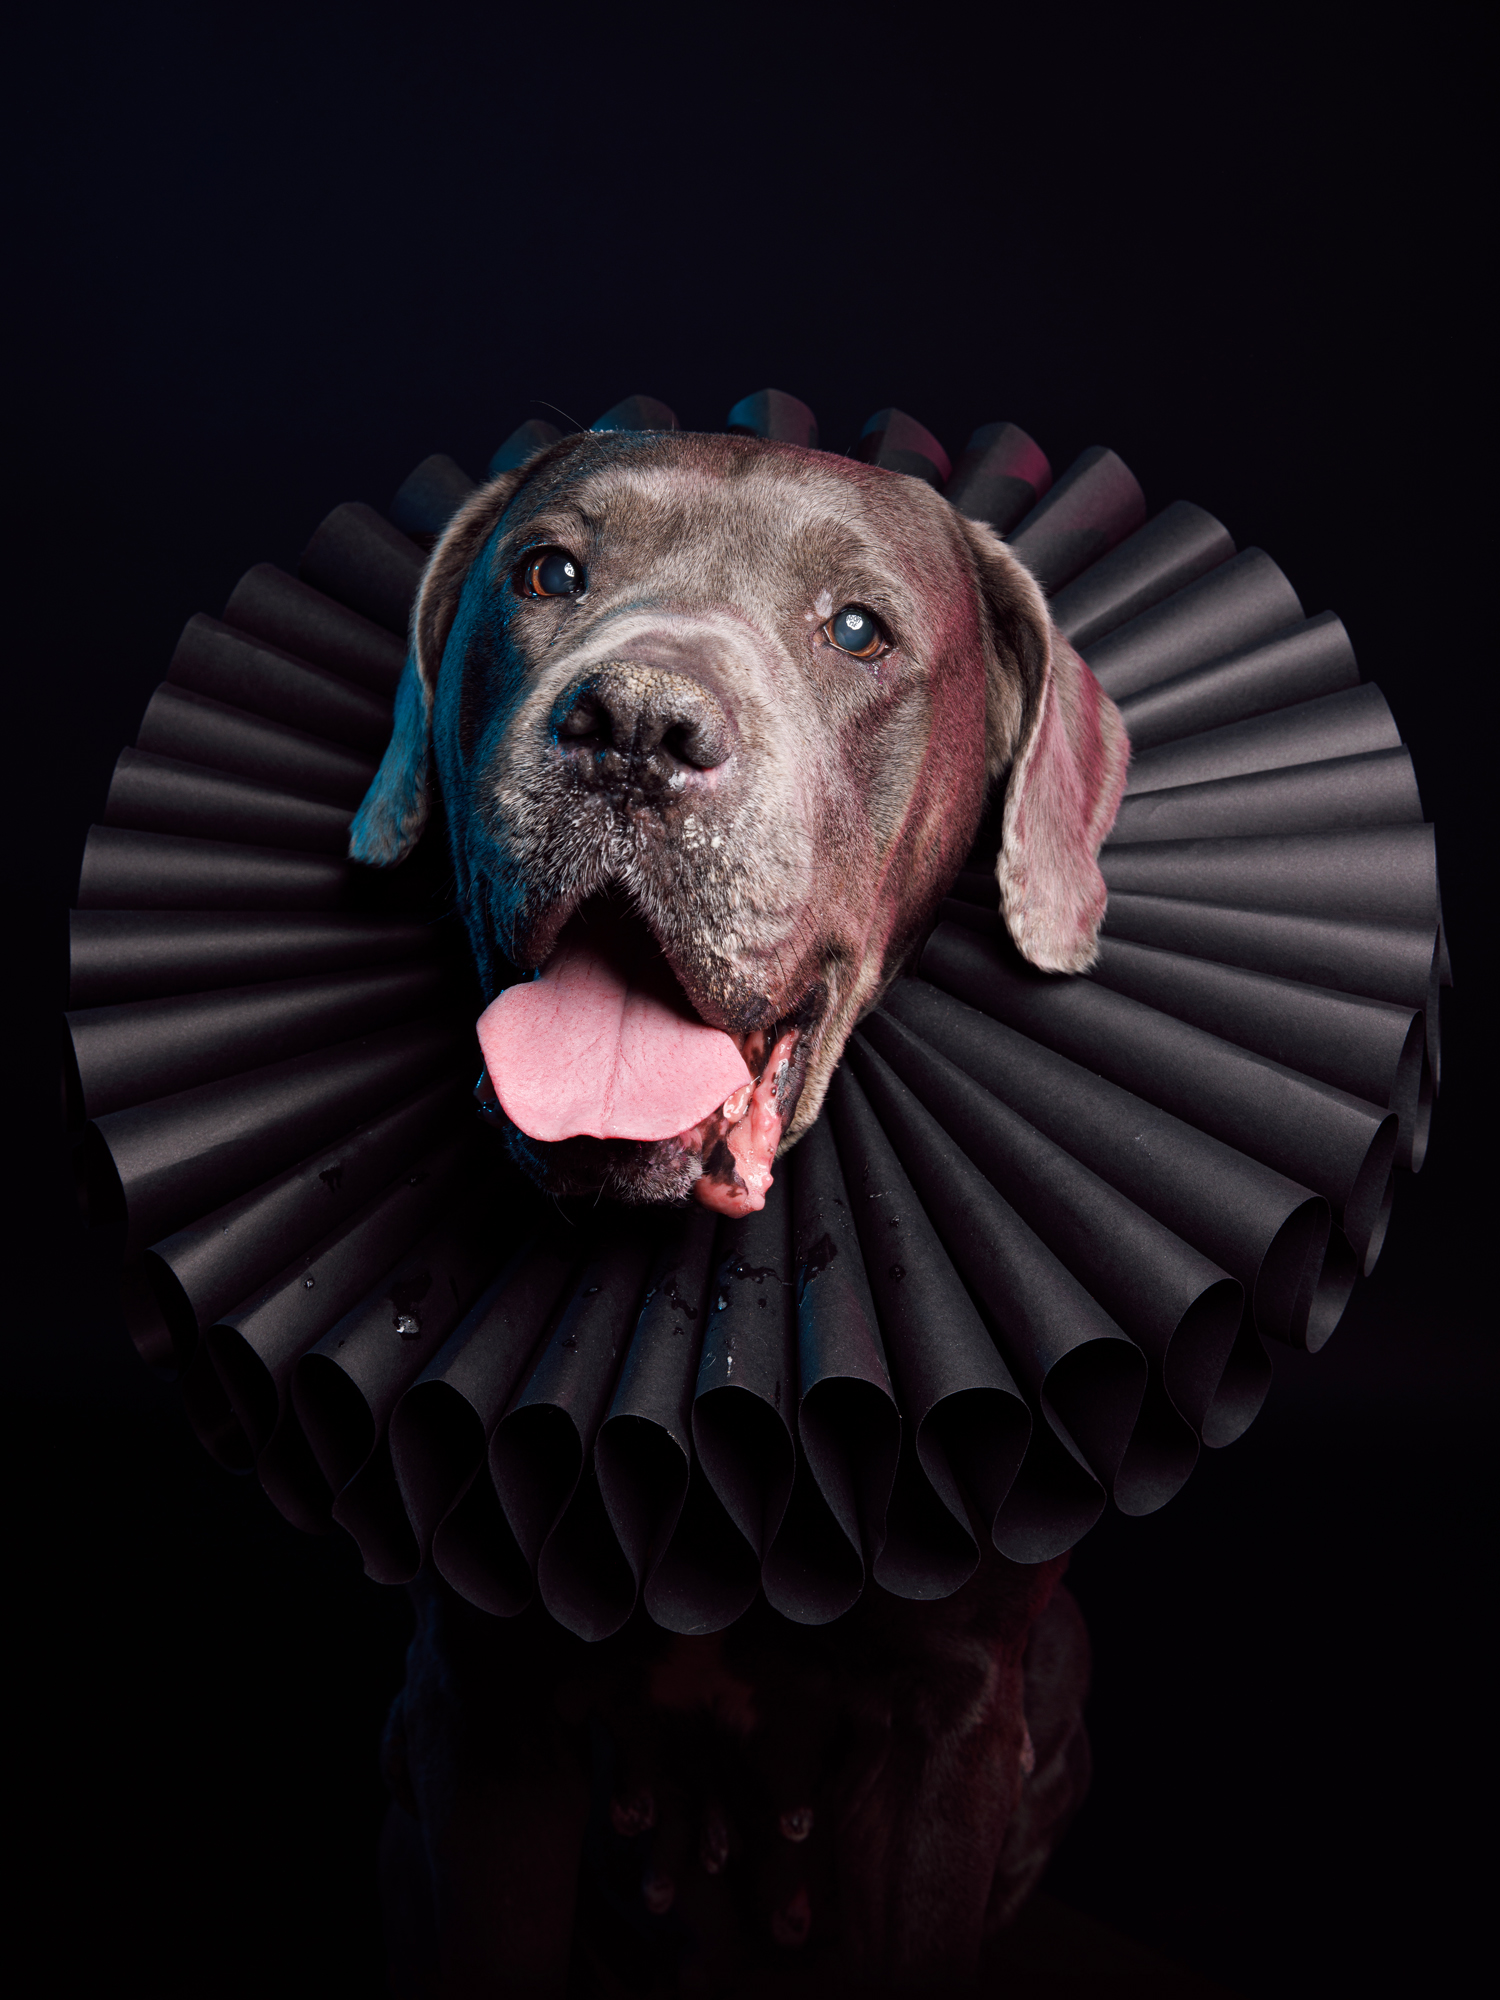 Portrait of a large Great Dane / Mastiff / Bully mixed breed dog wearing a meter wide black ruff collar